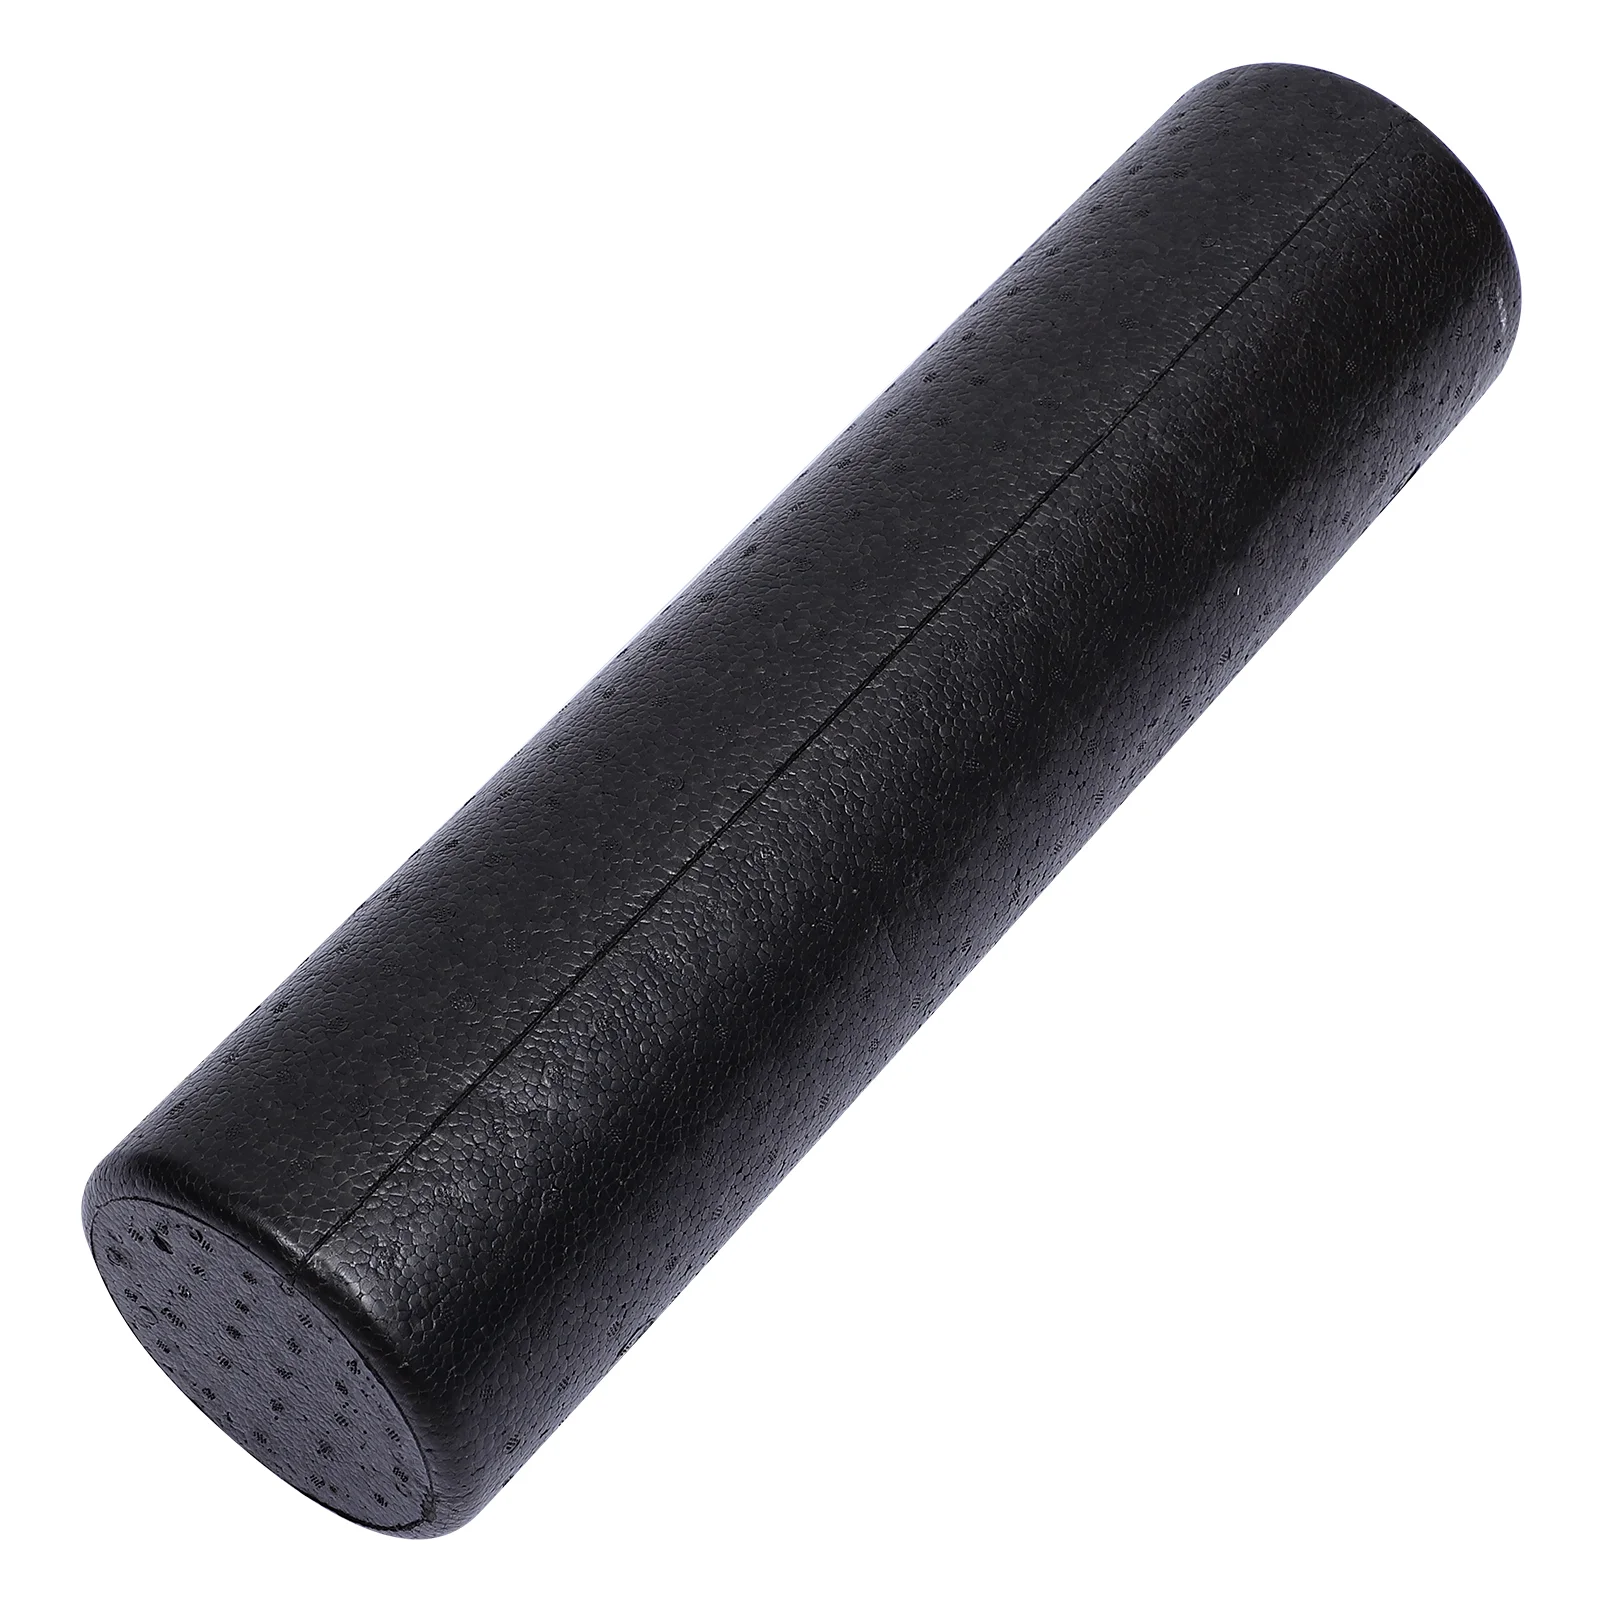 

Roller Foam Yoga Rollers Fitness Exercise Density High Accessories Physical Set Muscle Equipment Roll Stick Oam Neck Tissue Deep